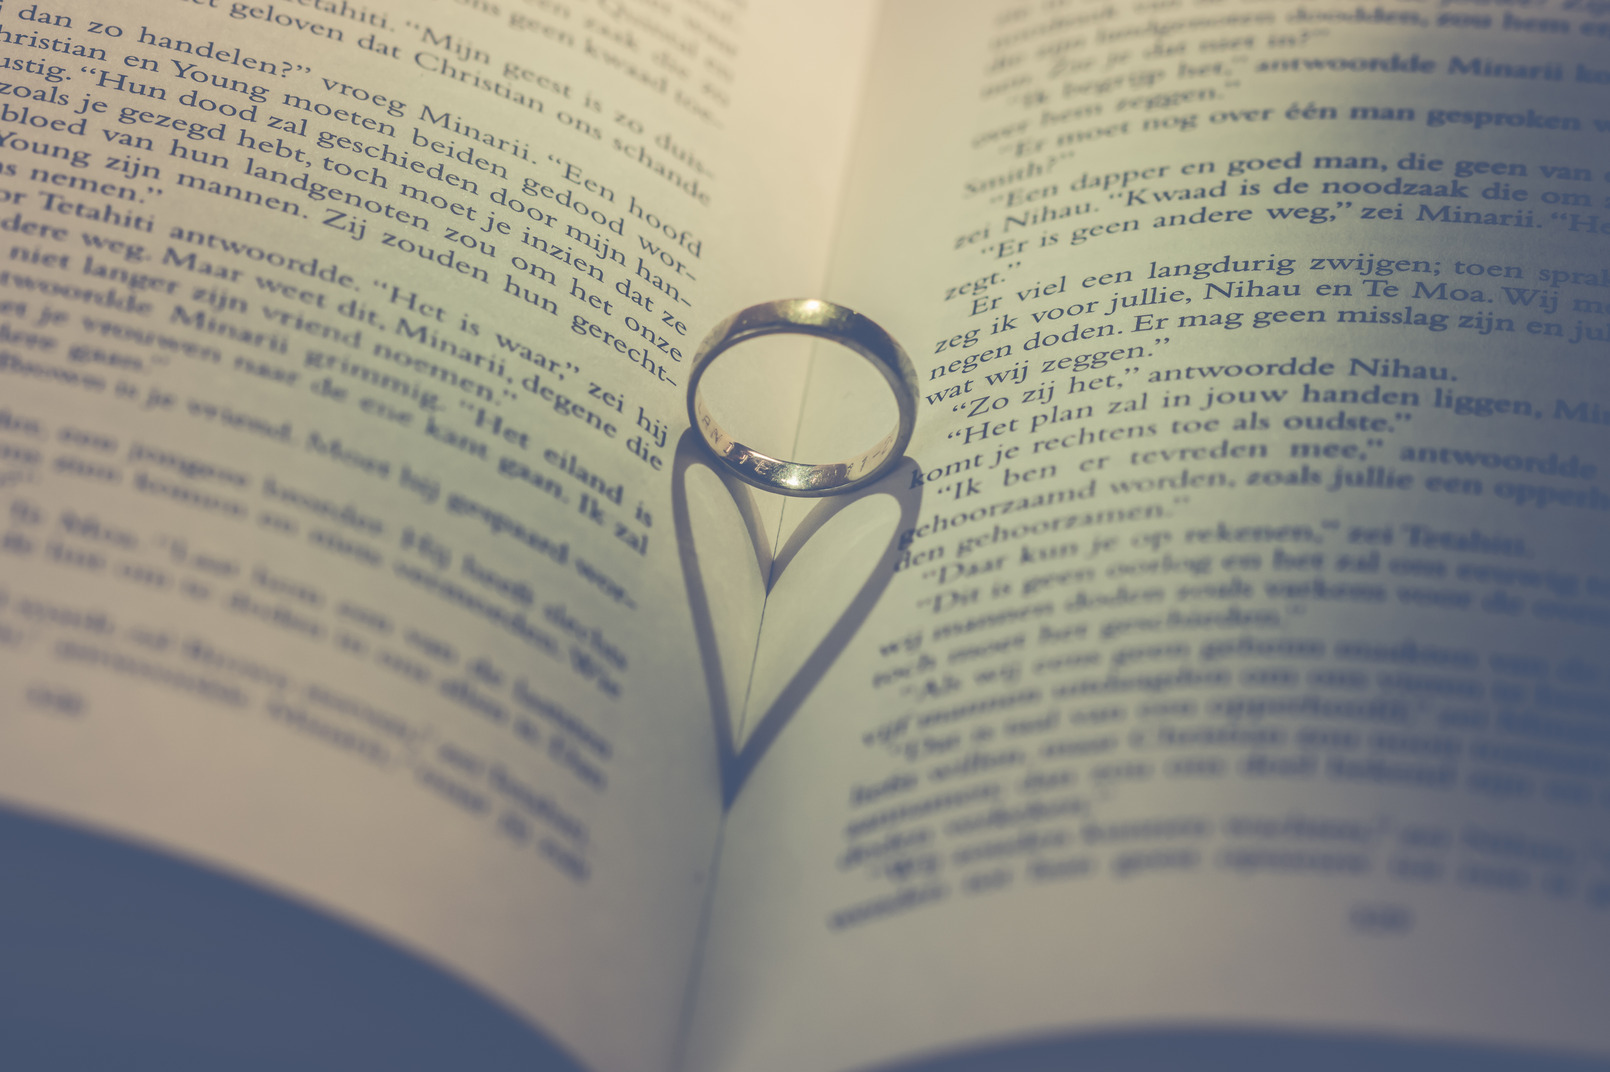 Ring on book